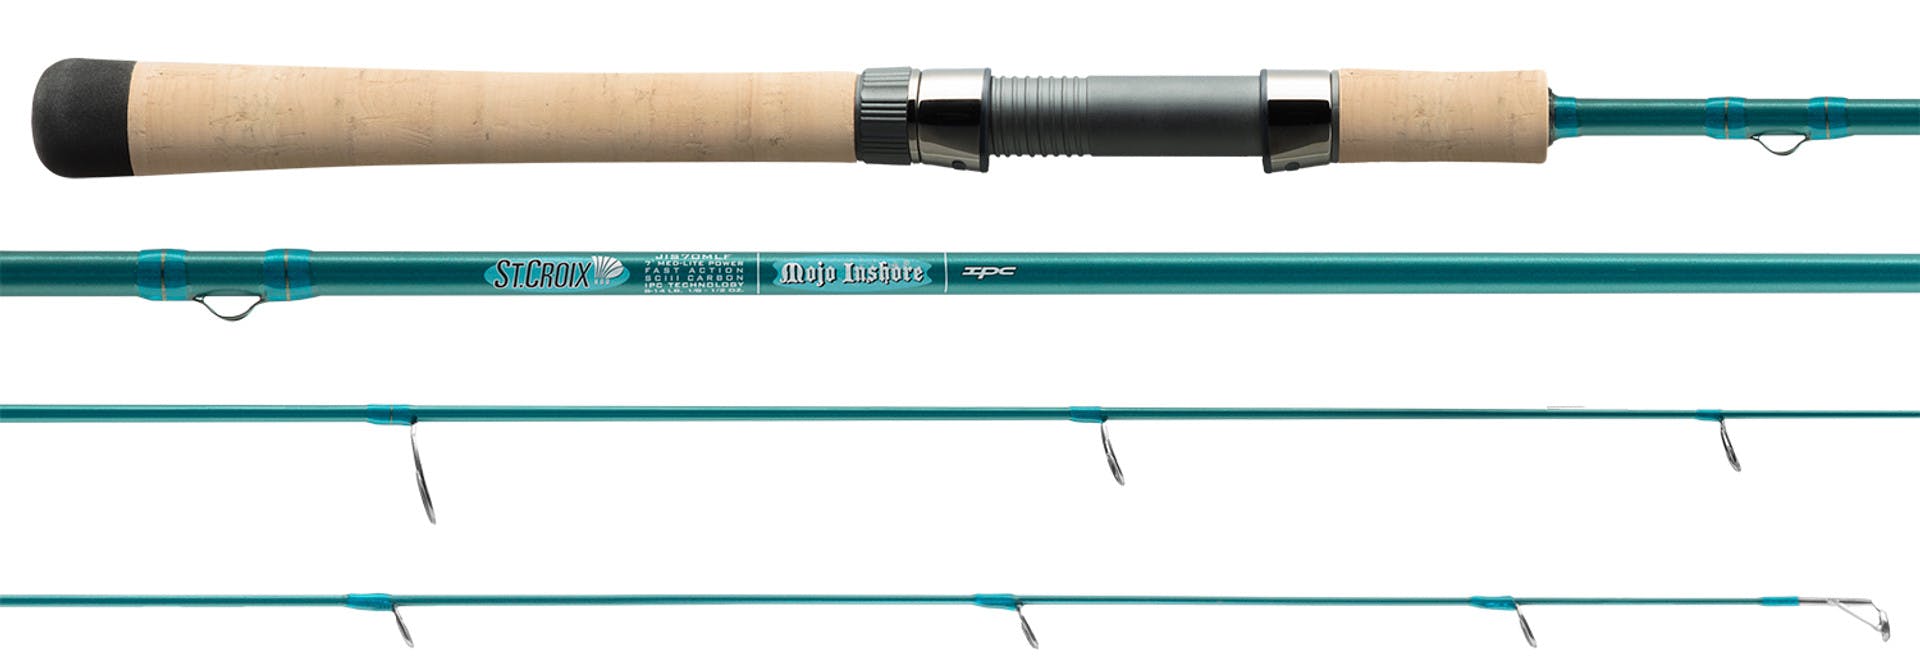 Expert Review: St. Croix Mojo Inshore Spinning Rod